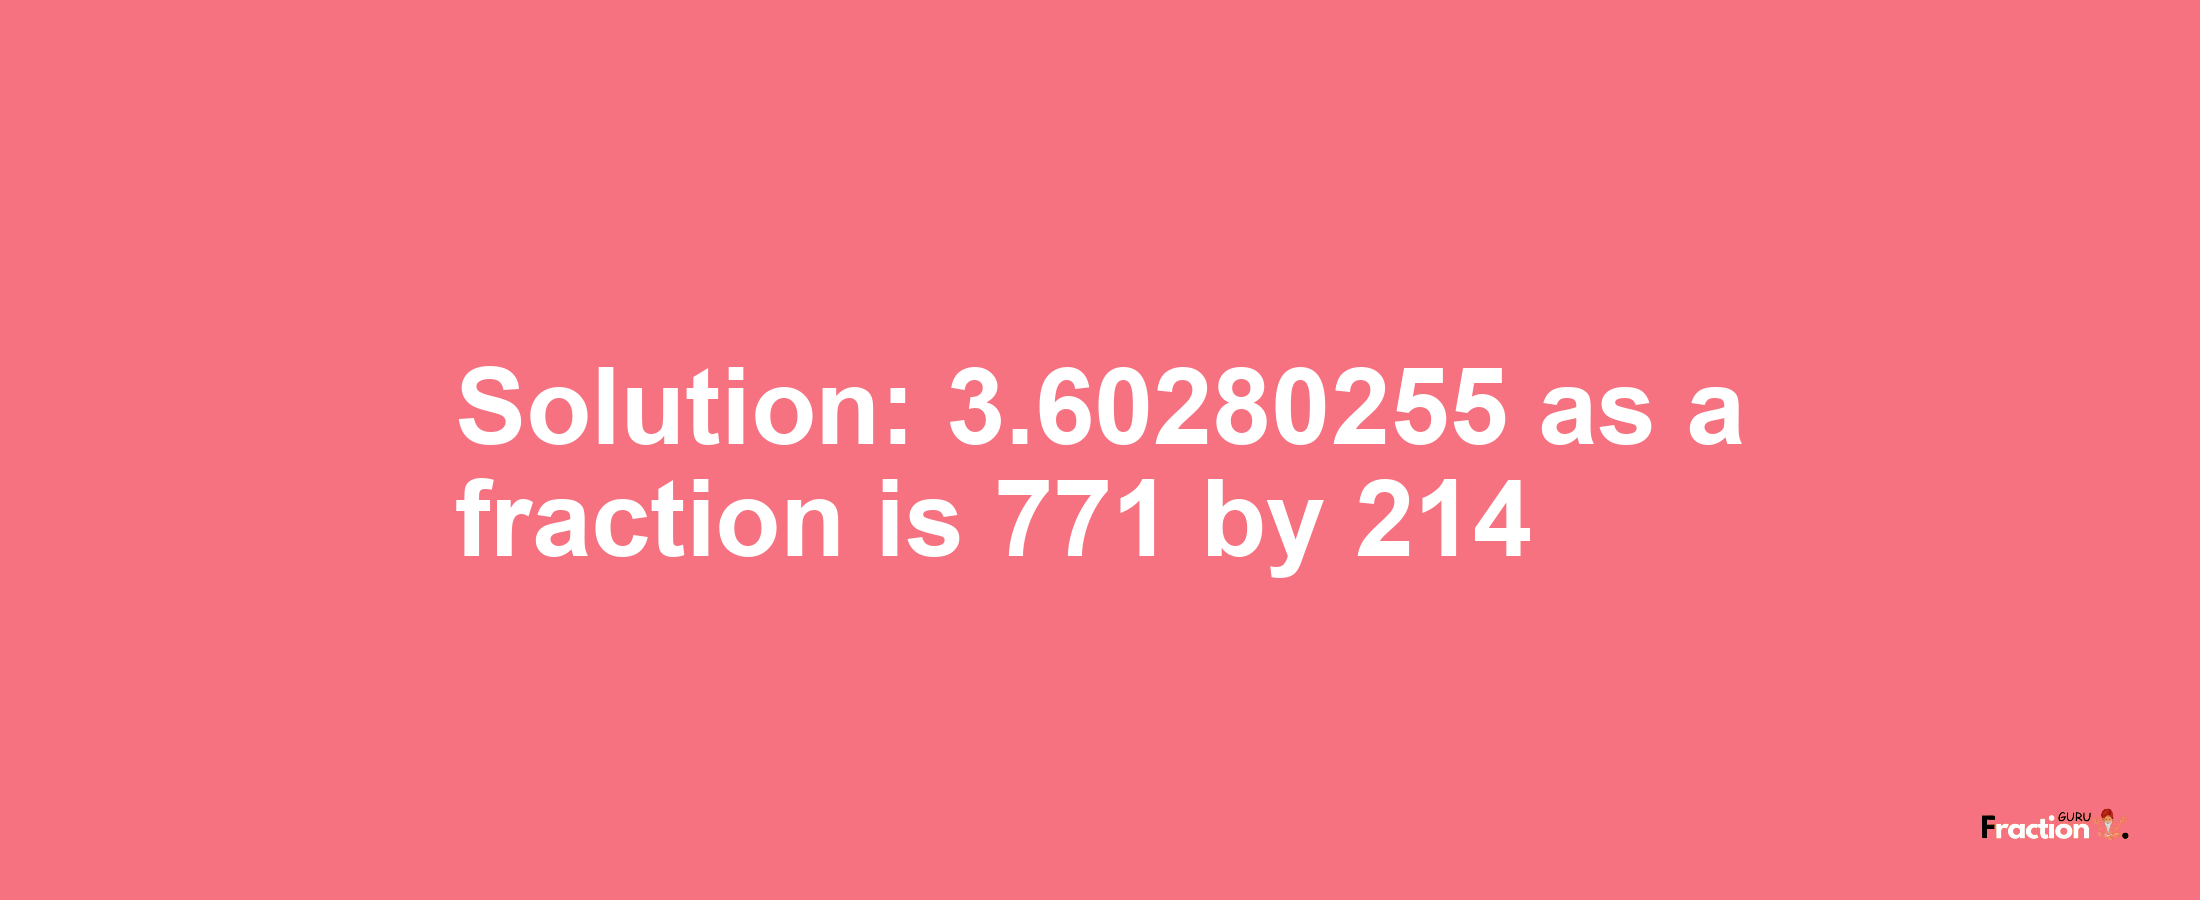 Solution:3.60280255 as a fraction is 771/214